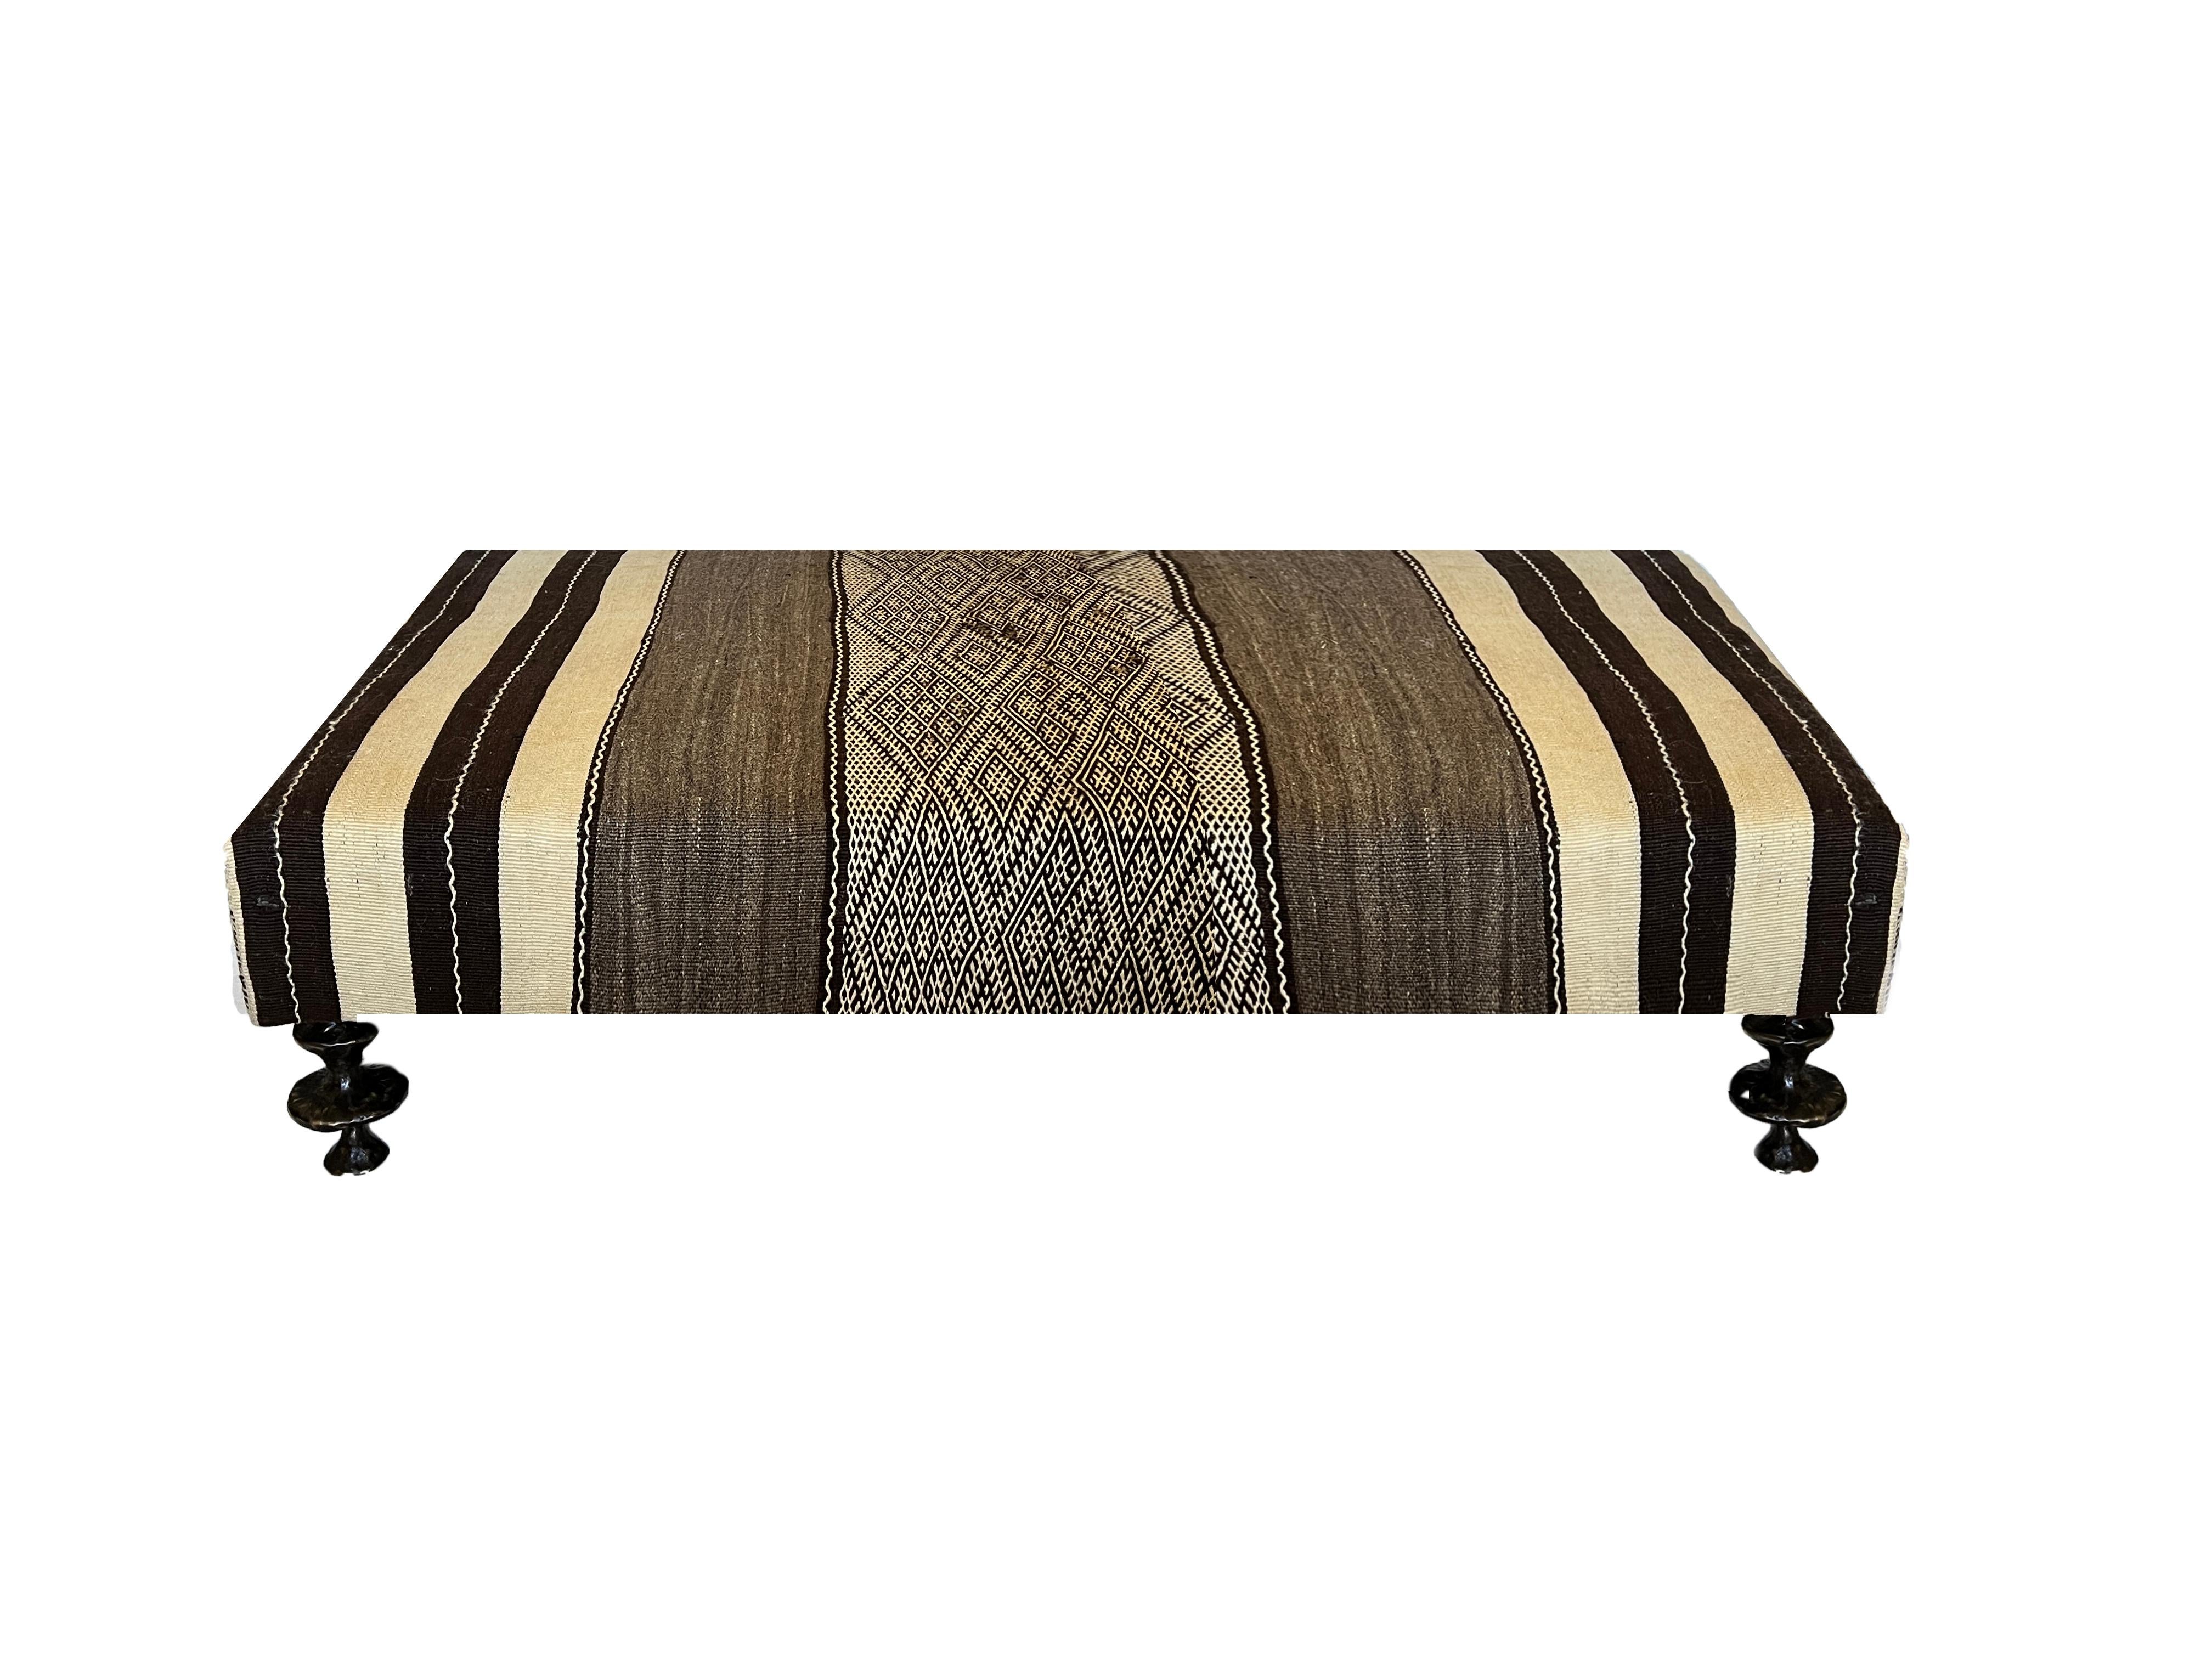 The distinctive Anouk Coffee Table is a perfect accent to soften a space with utilitarian function. The coffee table features hand sculpted legs in bronze. Custom sizes and finishes are available. Available in your own fabric or leather. Fabric not